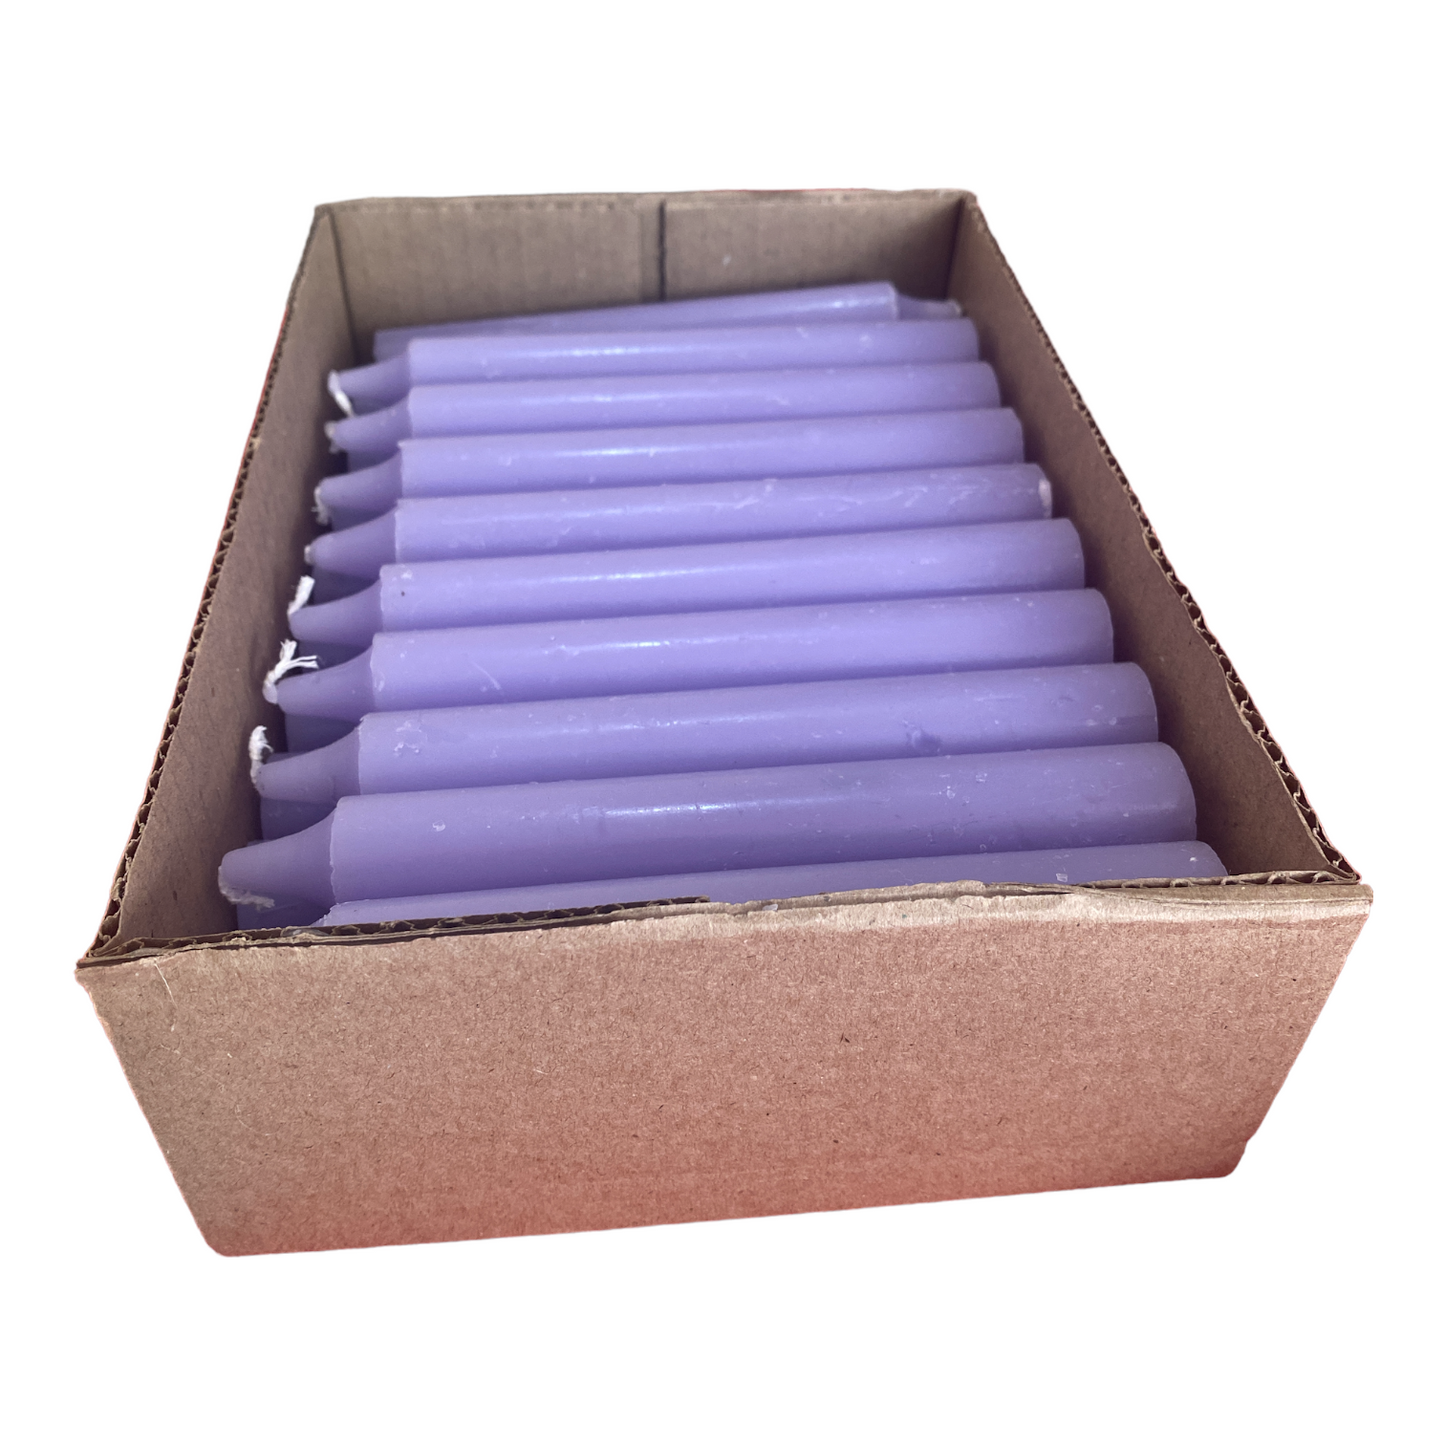 Box of 30 Purple Candles - Solid- 14cm